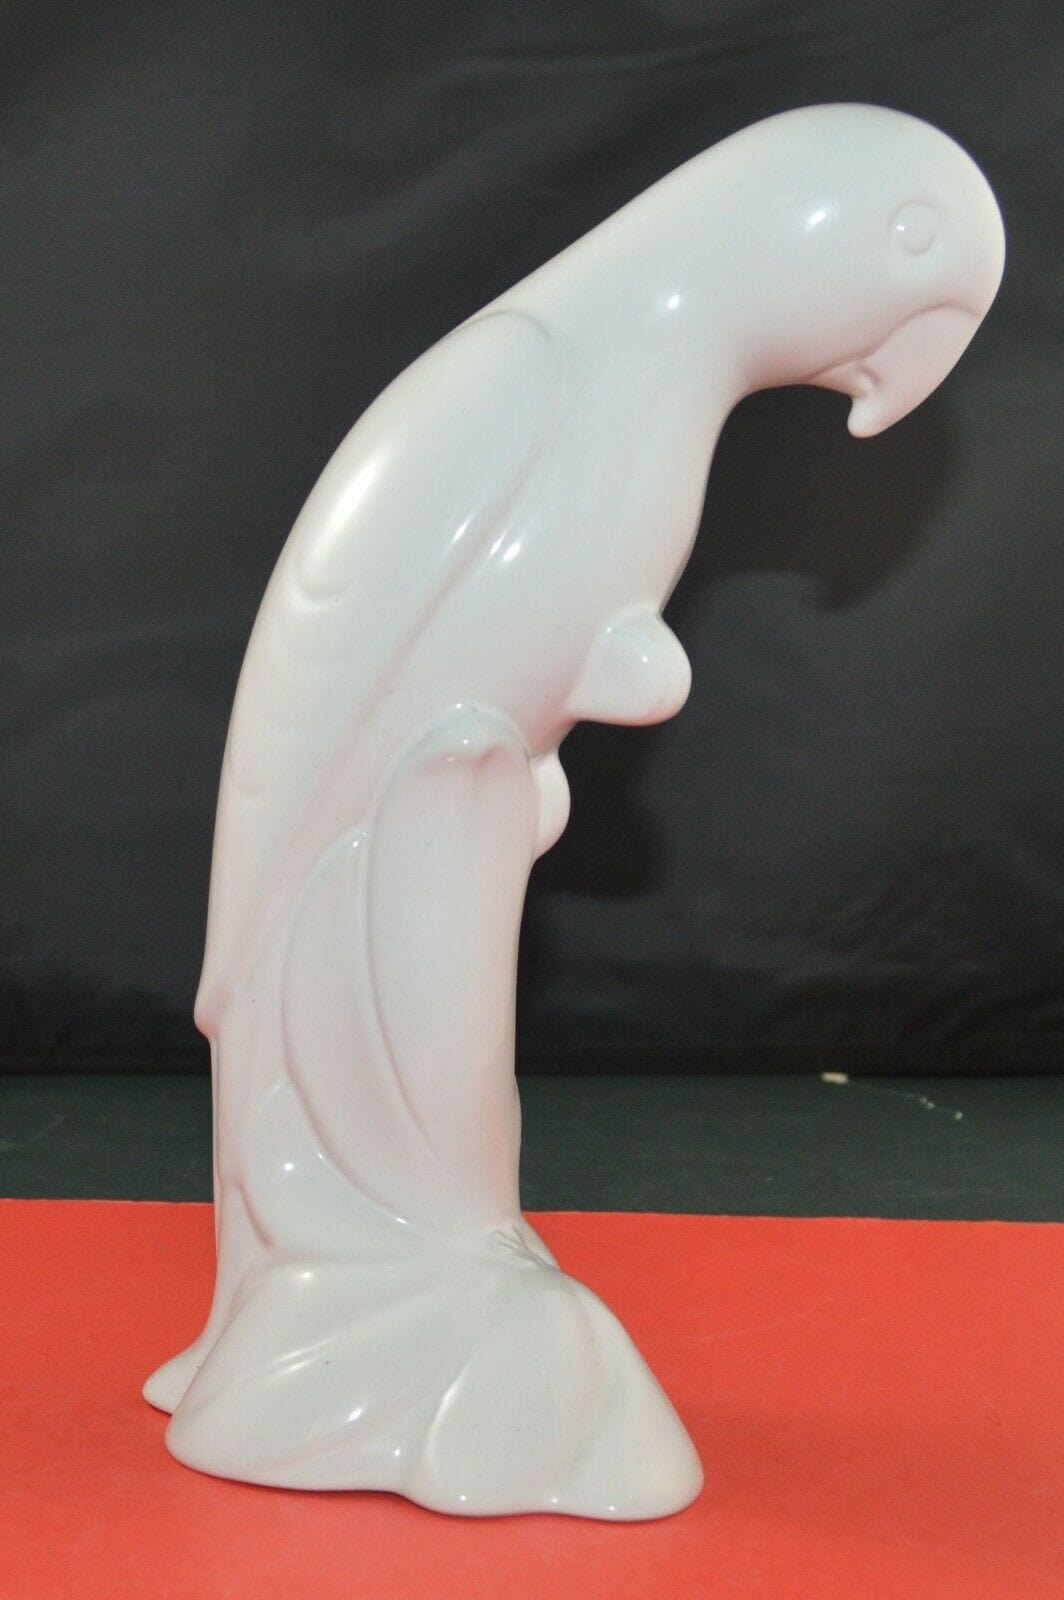 BIRD FIGURINE ELEVEN INCH WHITE PARROT FIGURINE( PREVIOUSLY OWNED)GOOD CONDITION - TMD167207